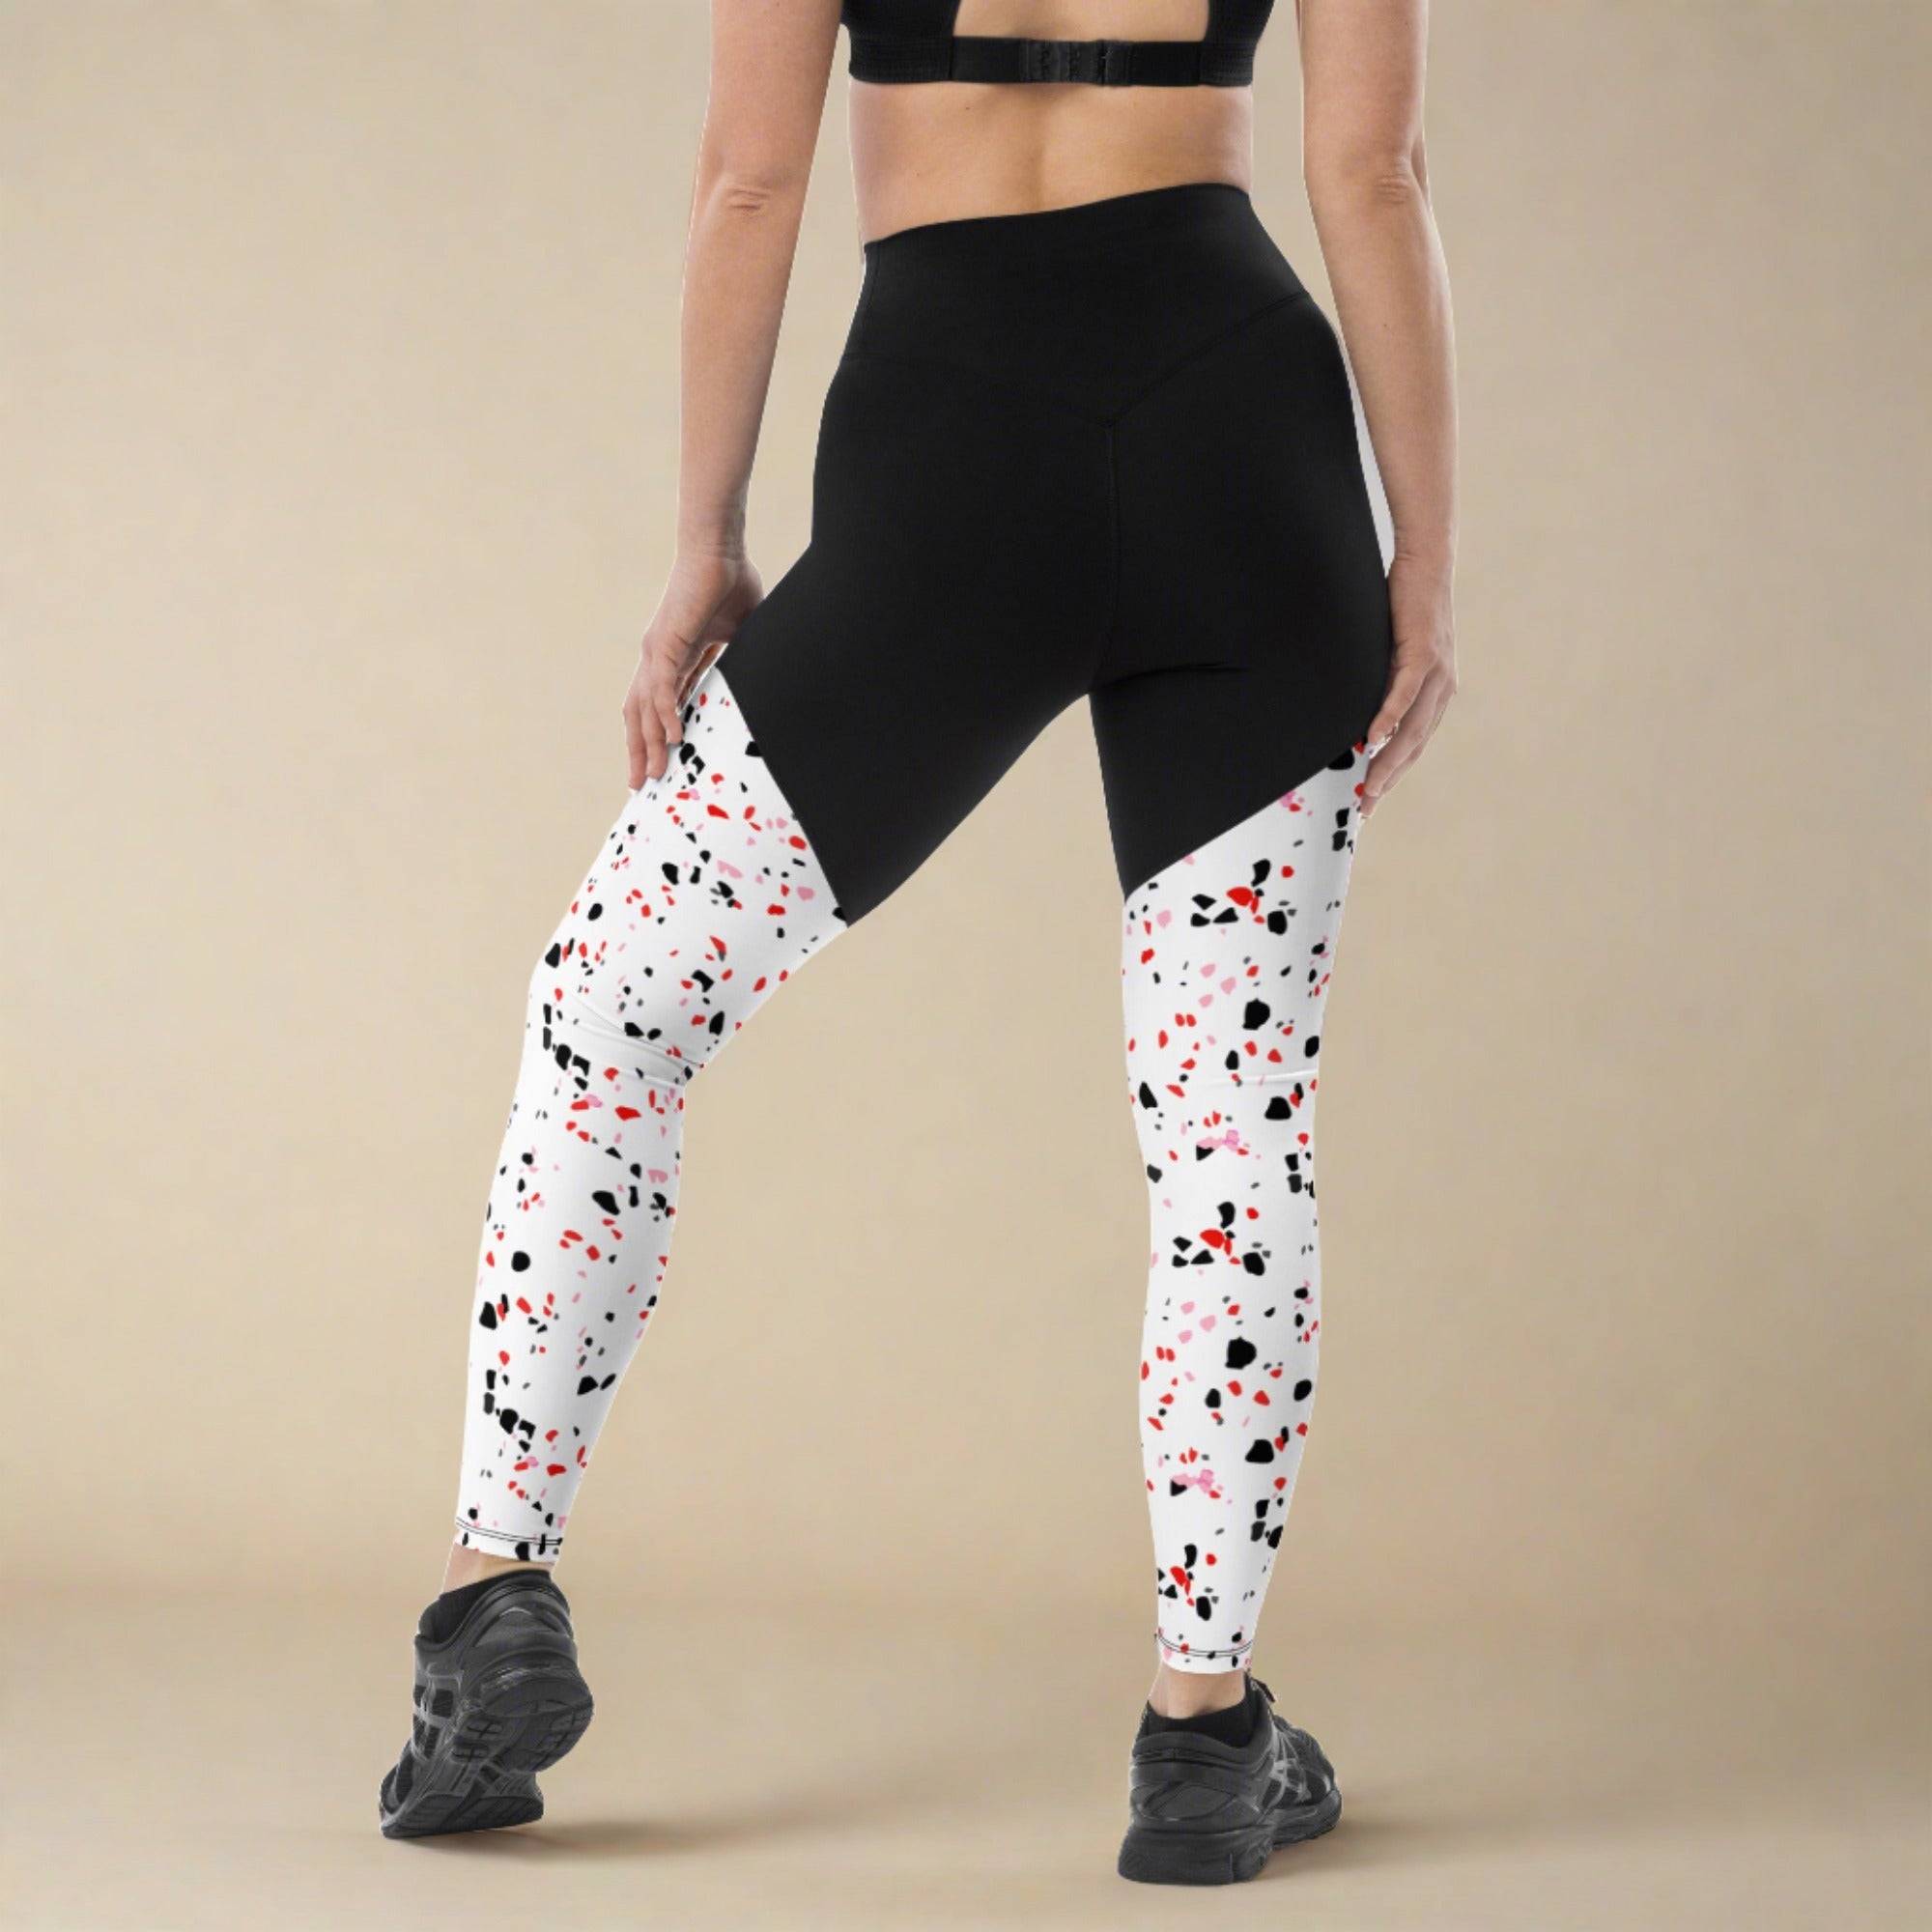 Radiant sports leggings with compression fabric and sewn in gusset